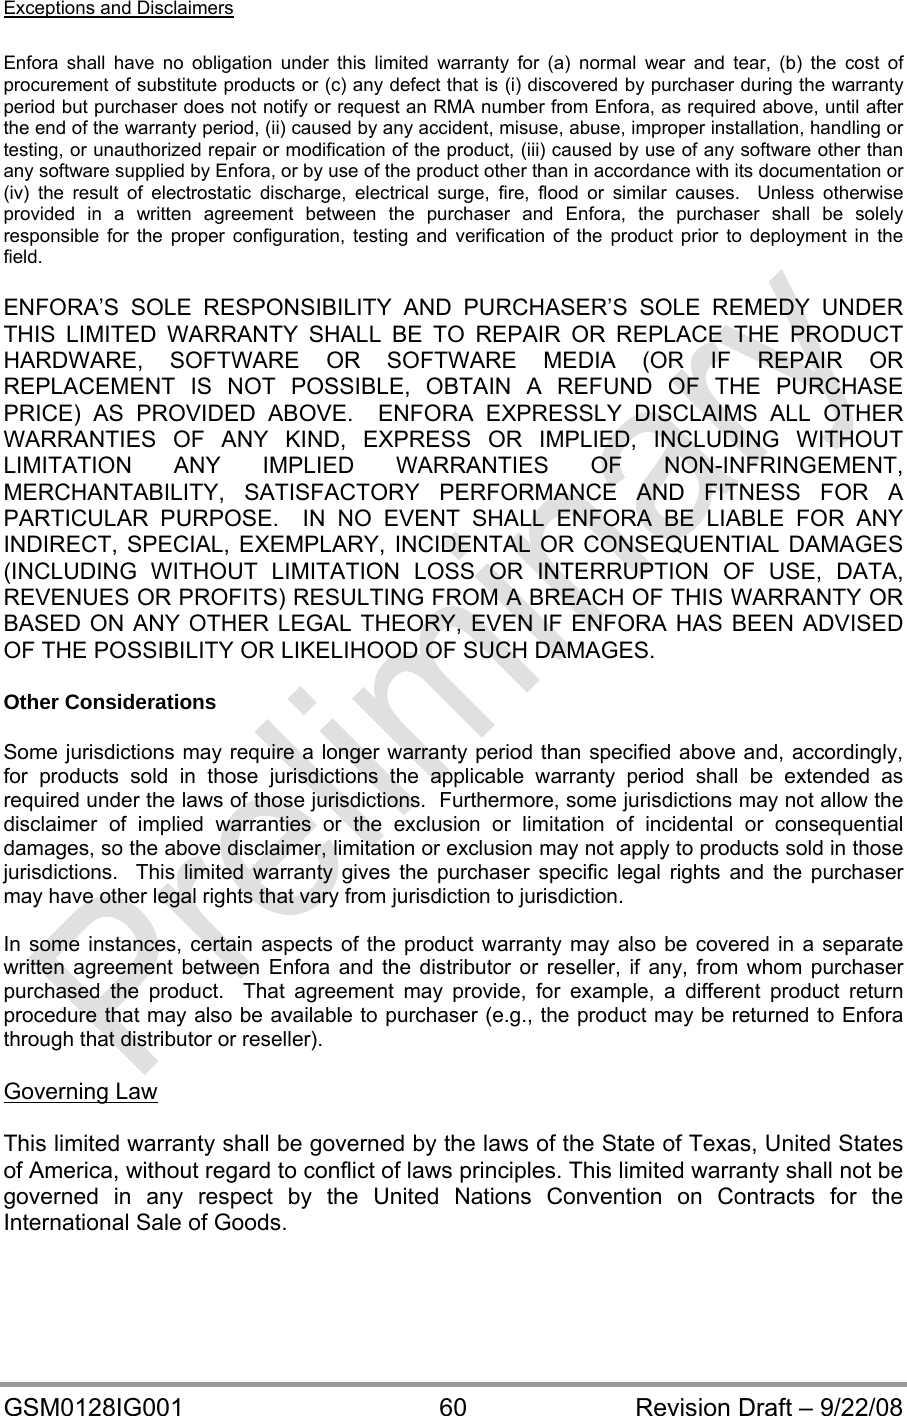  GSM0128IG001  60  Revision Draft – 9/22/08 Exceptions and Disclaimers  Enfora shall have no obligation under this limited warranty for (a) normal wear and tear, (b) the cost of procurement of substitute products or (c) any defect that is (i) discovered by purchaser during the warranty period but purchaser does not notify or request an RMA number from Enfora, as required above, until after the end of the warranty period, (ii) caused by any accident, misuse, abuse, improper installation, handling or testing, or unauthorized repair or modification of the product, (iii) caused by use of any software other than any software supplied by Enfora, or by use of the product other than in accordance with its documentation or (iv) the result of electrostatic discharge, electrical surge, fire, flood or similar causes.  Unless otherwise provided in a written agreement between the purchaser and Enfora, the purchaser shall be solely responsible for the proper configuration, testing and verification of the product prior to deployment in the field.  ENFORA’S SOLE RESPONSIBILITY AND PURCHASER’S SOLE REMEDY UNDER THIS LIMITED WARRANTY SHALL BE TO REPAIR OR REPLACE THE PRODUCT HARDWARE, SOFTWARE OR SOFTWARE MEDIA (OR IF REPAIR OR REPLACEMENT IS NOT POSSIBLE, OBTAIN A REFUND OF THE PURCHASE PRICE) AS PROVIDED ABOVE.  ENFORA EXPRESSLY DISCLAIMS ALL OTHER WARRANTIES OF ANY KIND, EXPRESS OR IMPLIED, INCLUDING WITHOUT LIMITATION ANY IMPLIED WARRANTIES OF NON-INFRINGEMENT, MERCHANTABILITY, SATISFACTORY PERFORMANCE AND FITNESS FOR A PARTICULAR PURPOSE.  IN NO EVENT SHALL ENFORA BE LIABLE FOR ANY INDIRECT, SPECIAL, EXEMPLARY, INCIDENTAL OR CONSEQUENTIAL DAMAGES (INCLUDING WITHOUT LIMITATION LOSS OR INTERRUPTION OF USE, DATA, REVENUES OR PROFITS) RESULTING FROM A BREACH OF THIS WARRANTY OR BASED ON ANY OTHER LEGAL THEORY, EVEN IF ENFORA HAS BEEN ADVISED OF THE POSSIBILITY OR LIKELIHOOD OF SUCH DAMAGES.  Other Considerations  Some jurisdictions may require a longer warranty period than specified above and, accordingly, for products sold in those jurisdictions the applicable warranty period shall be extended as required under the laws of those jurisdictions.  Furthermore, some jurisdictions may not allow the disclaimer of implied warranties or the exclusion or limitation of incidental or consequential damages, so the above disclaimer, limitation or exclusion may not apply to products sold in those jurisdictions.  This limited warranty gives the purchaser specific legal rights and the purchaser may have other legal rights that vary from jurisdiction to jurisdiction.  In some instances, certain aspects of the product warranty may also be covered in a separate written agreement between Enfora and the distributor or reseller, if any, from whom purchaser purchased the product.  That agreement may provide, for example, a different product return procedure that may also be available to purchaser (e.g., the product may be returned to Enfora through that distributor or reseller).  Governing Law  This limited warranty shall be governed by the laws of the State of Texas, United States of America, without regard to conflict of laws principles. This limited warranty shall not be governed in any respect by the United Nations Convention on Contracts for the International Sale of Goods. 